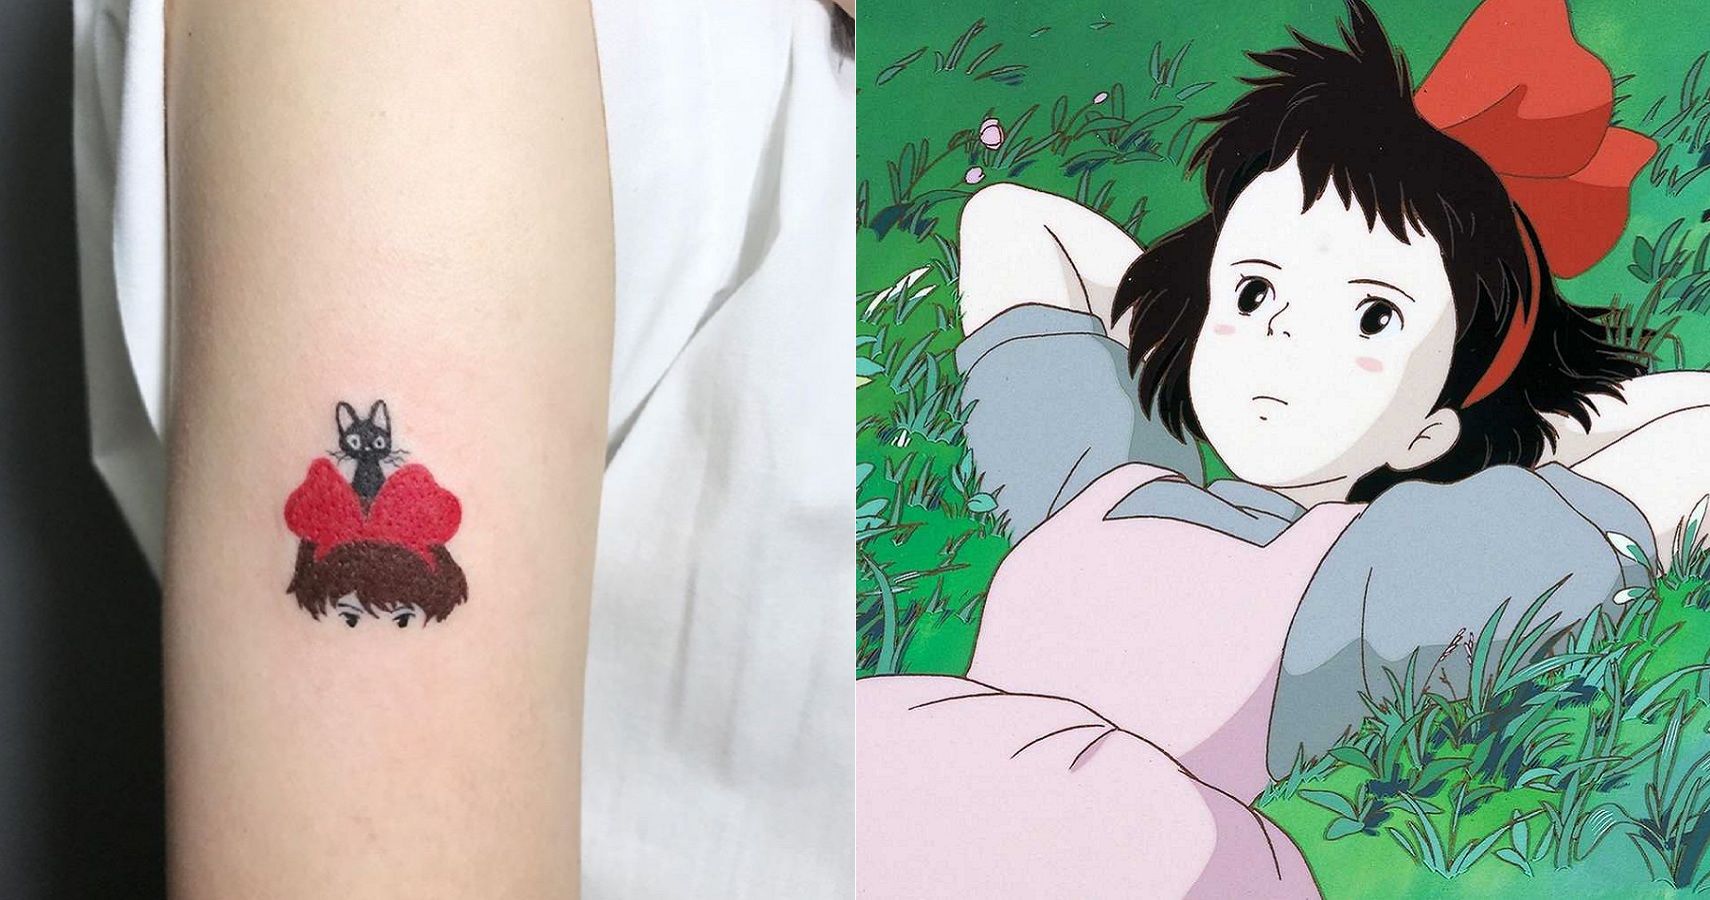 naomi lasagna  on Twitter  tattoo round 5 is for my boi haku  from my favourite ghibli film spirited away haku is the river spirit  chihiros guidance and wisdom in an